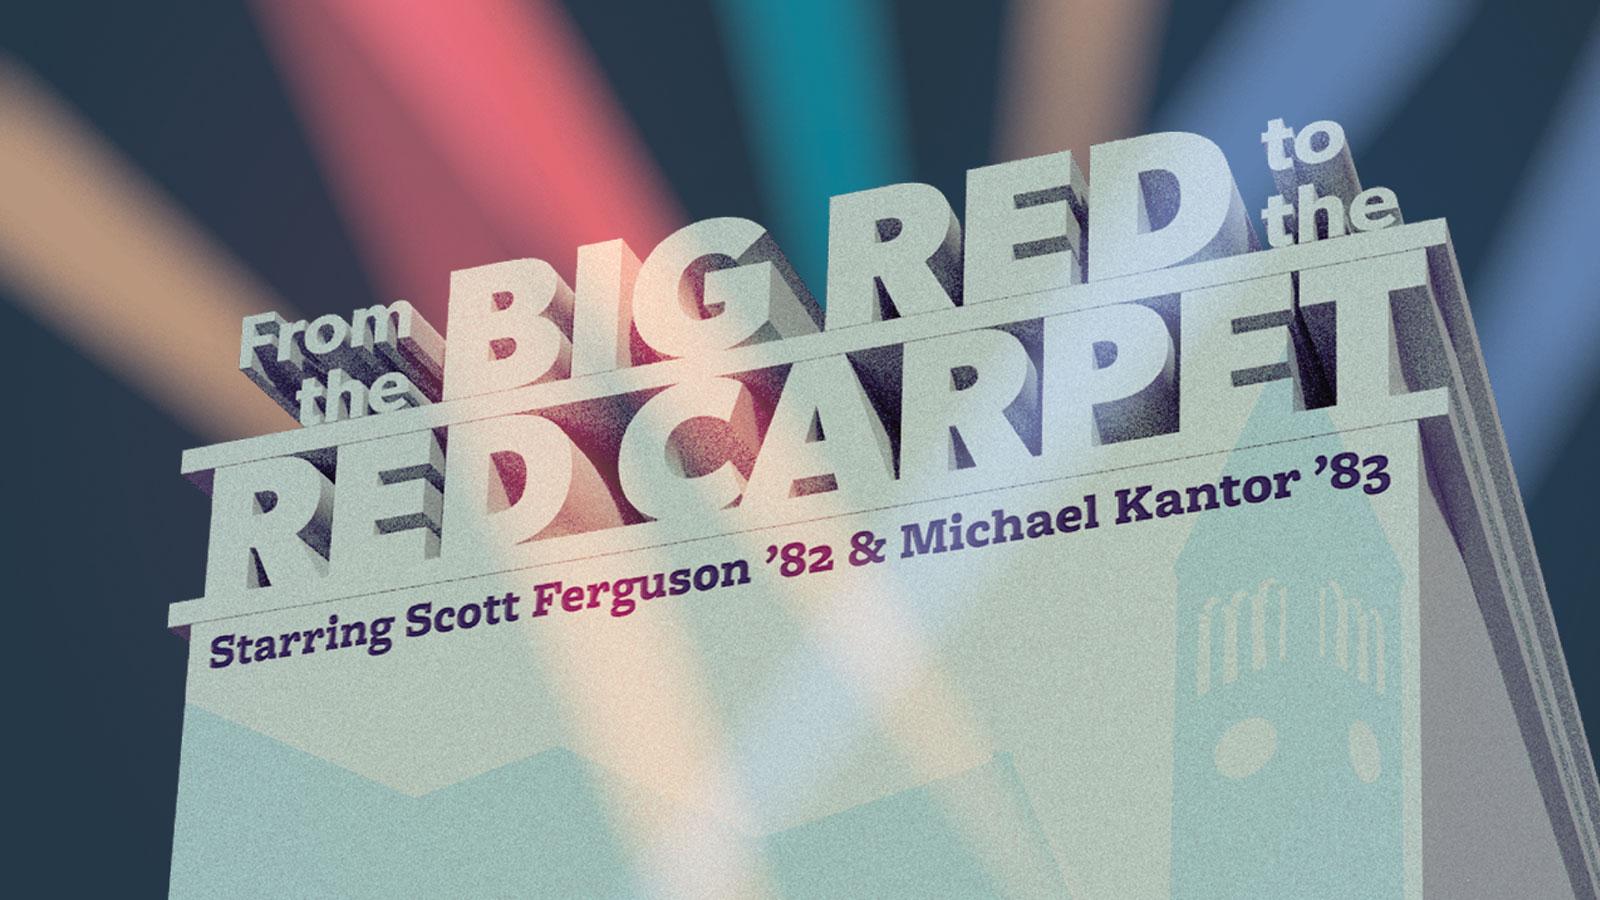 graphic with text "From the BIG RED to the RED CARPET staring Scott Ferguson '82 & Michael Kantor '83